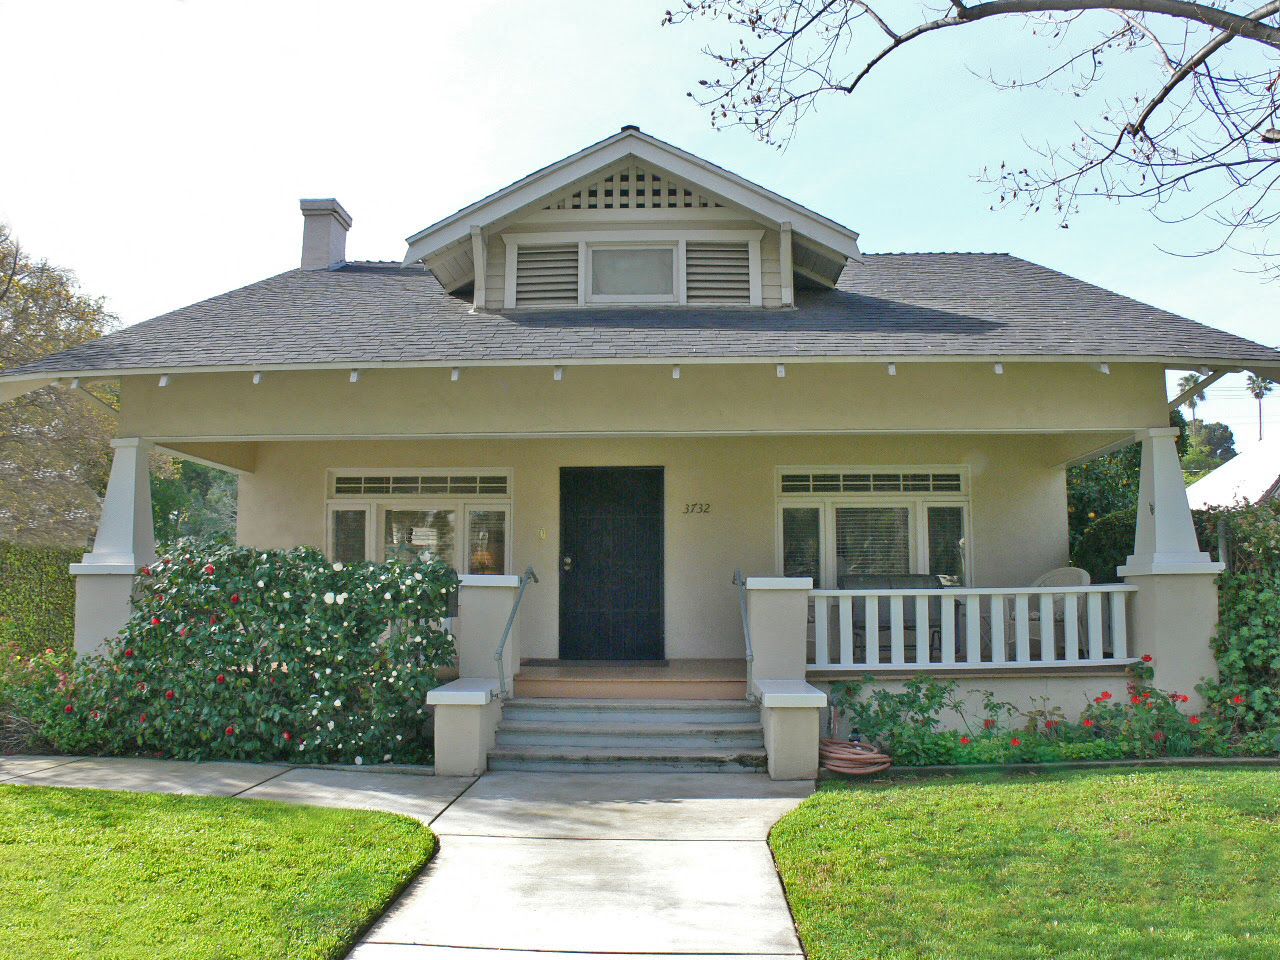 Fantastic california bungalow for sale - the top reference